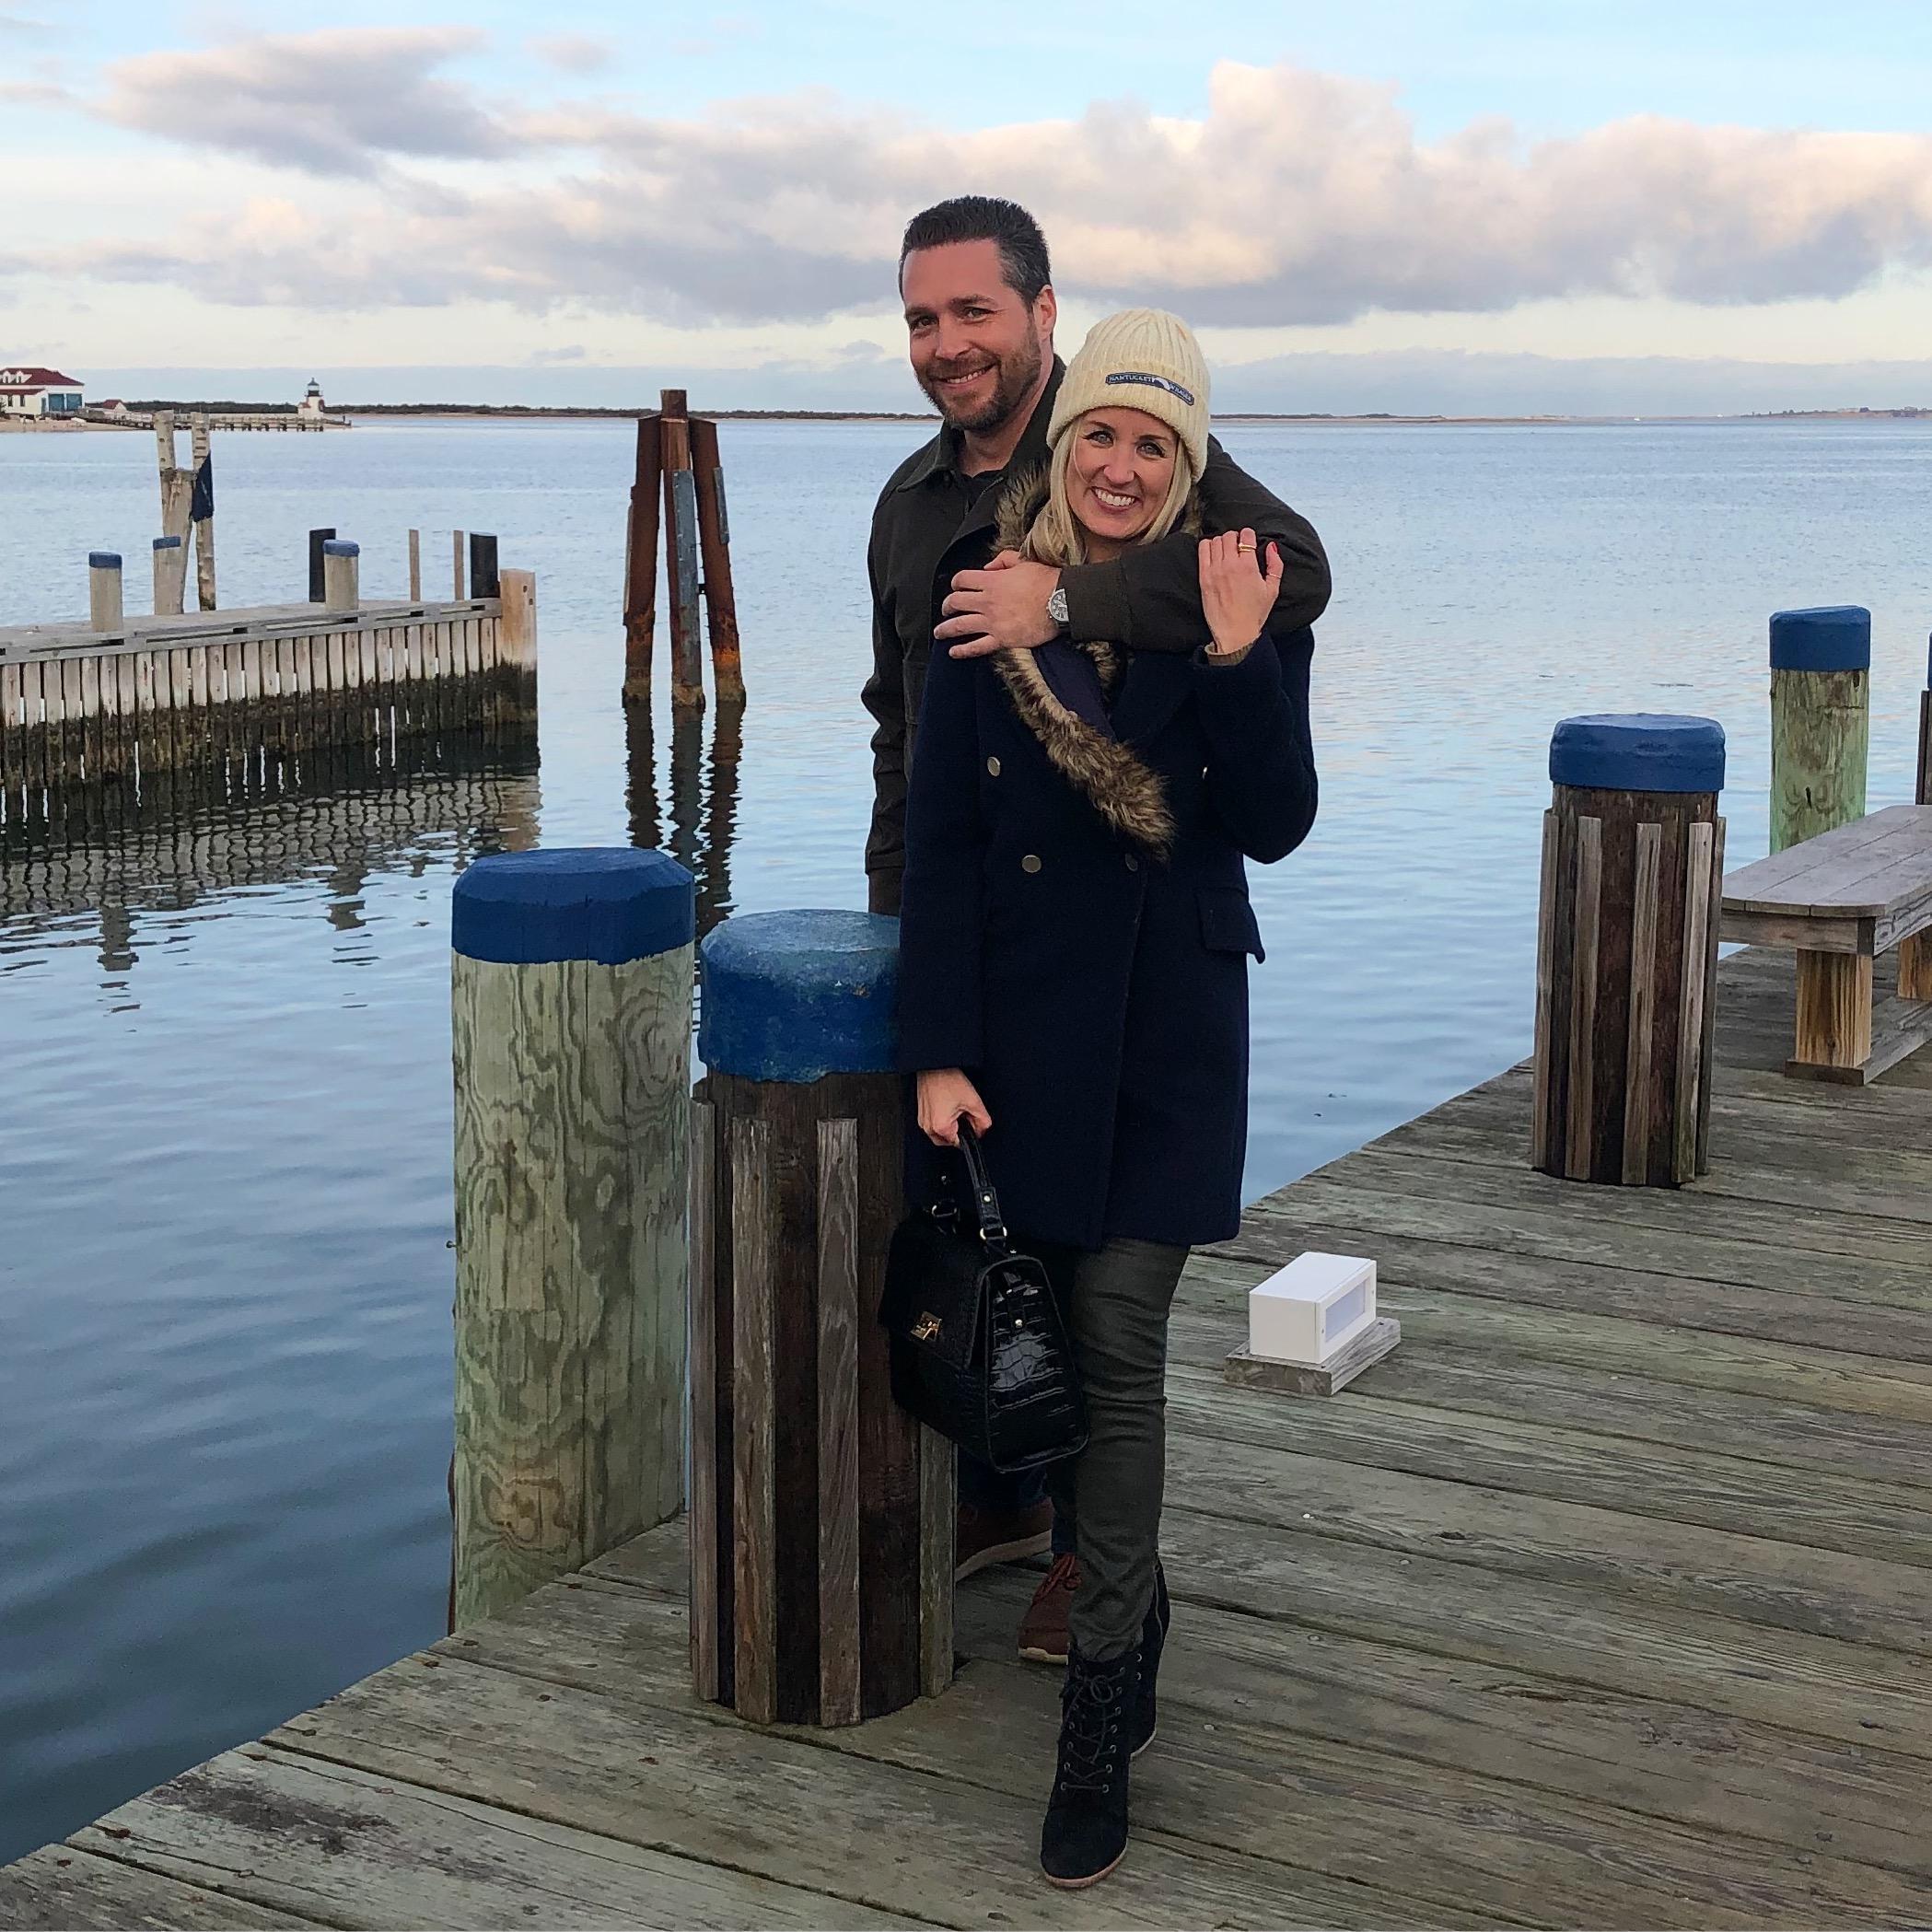 In our happy place, Nantucket!